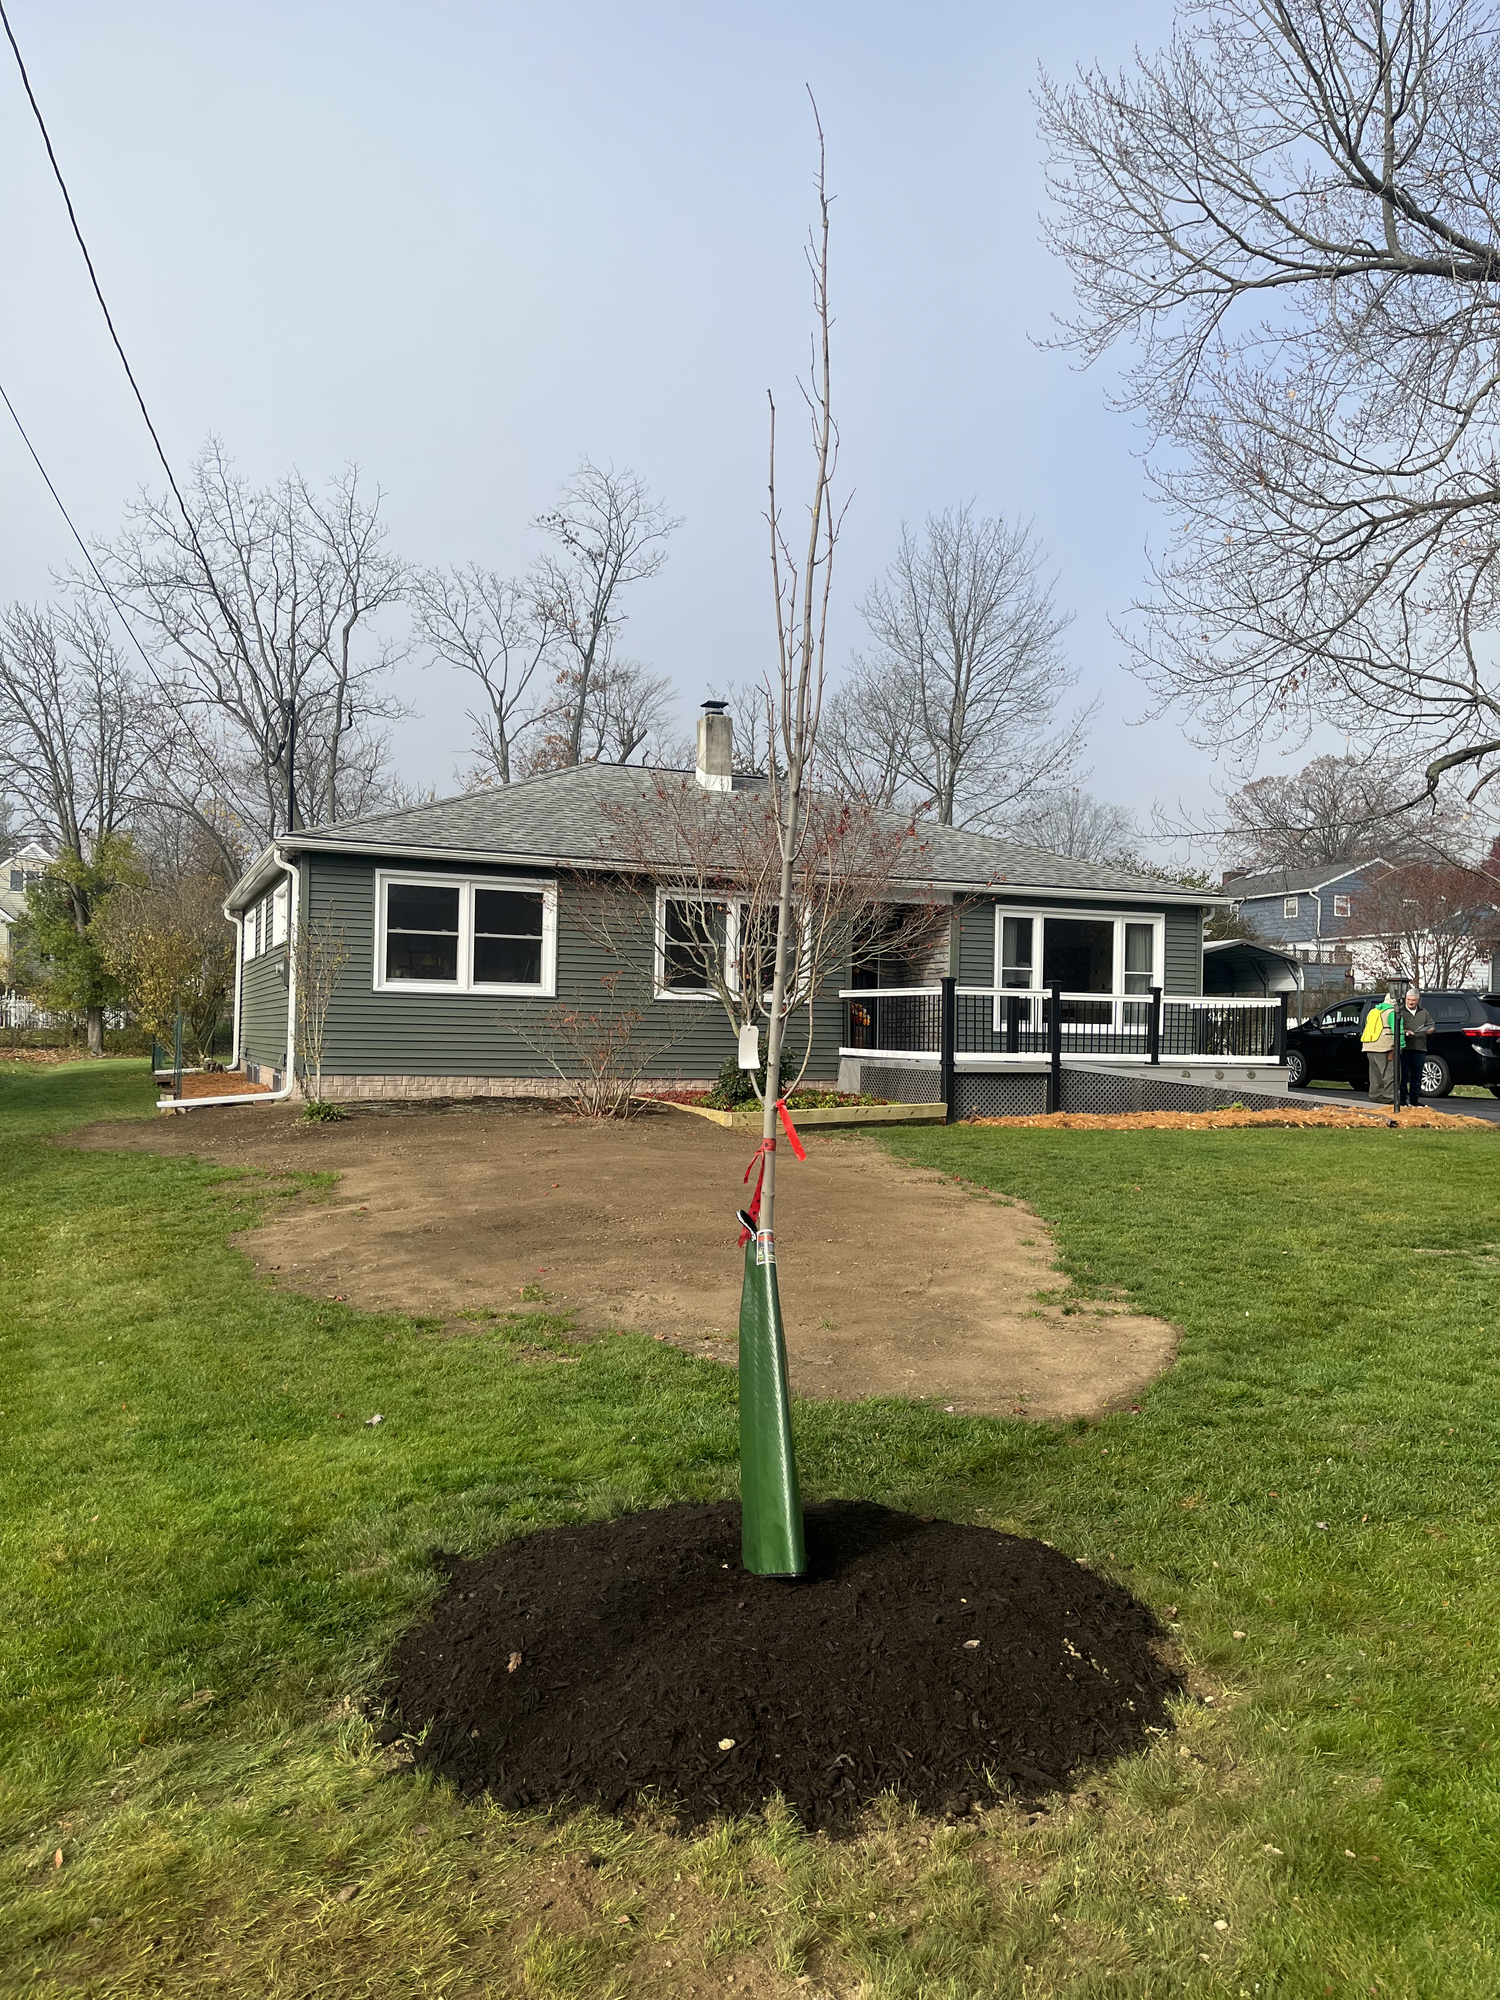 A tree planted recently in Elmira, NY as part of a town funded planting project